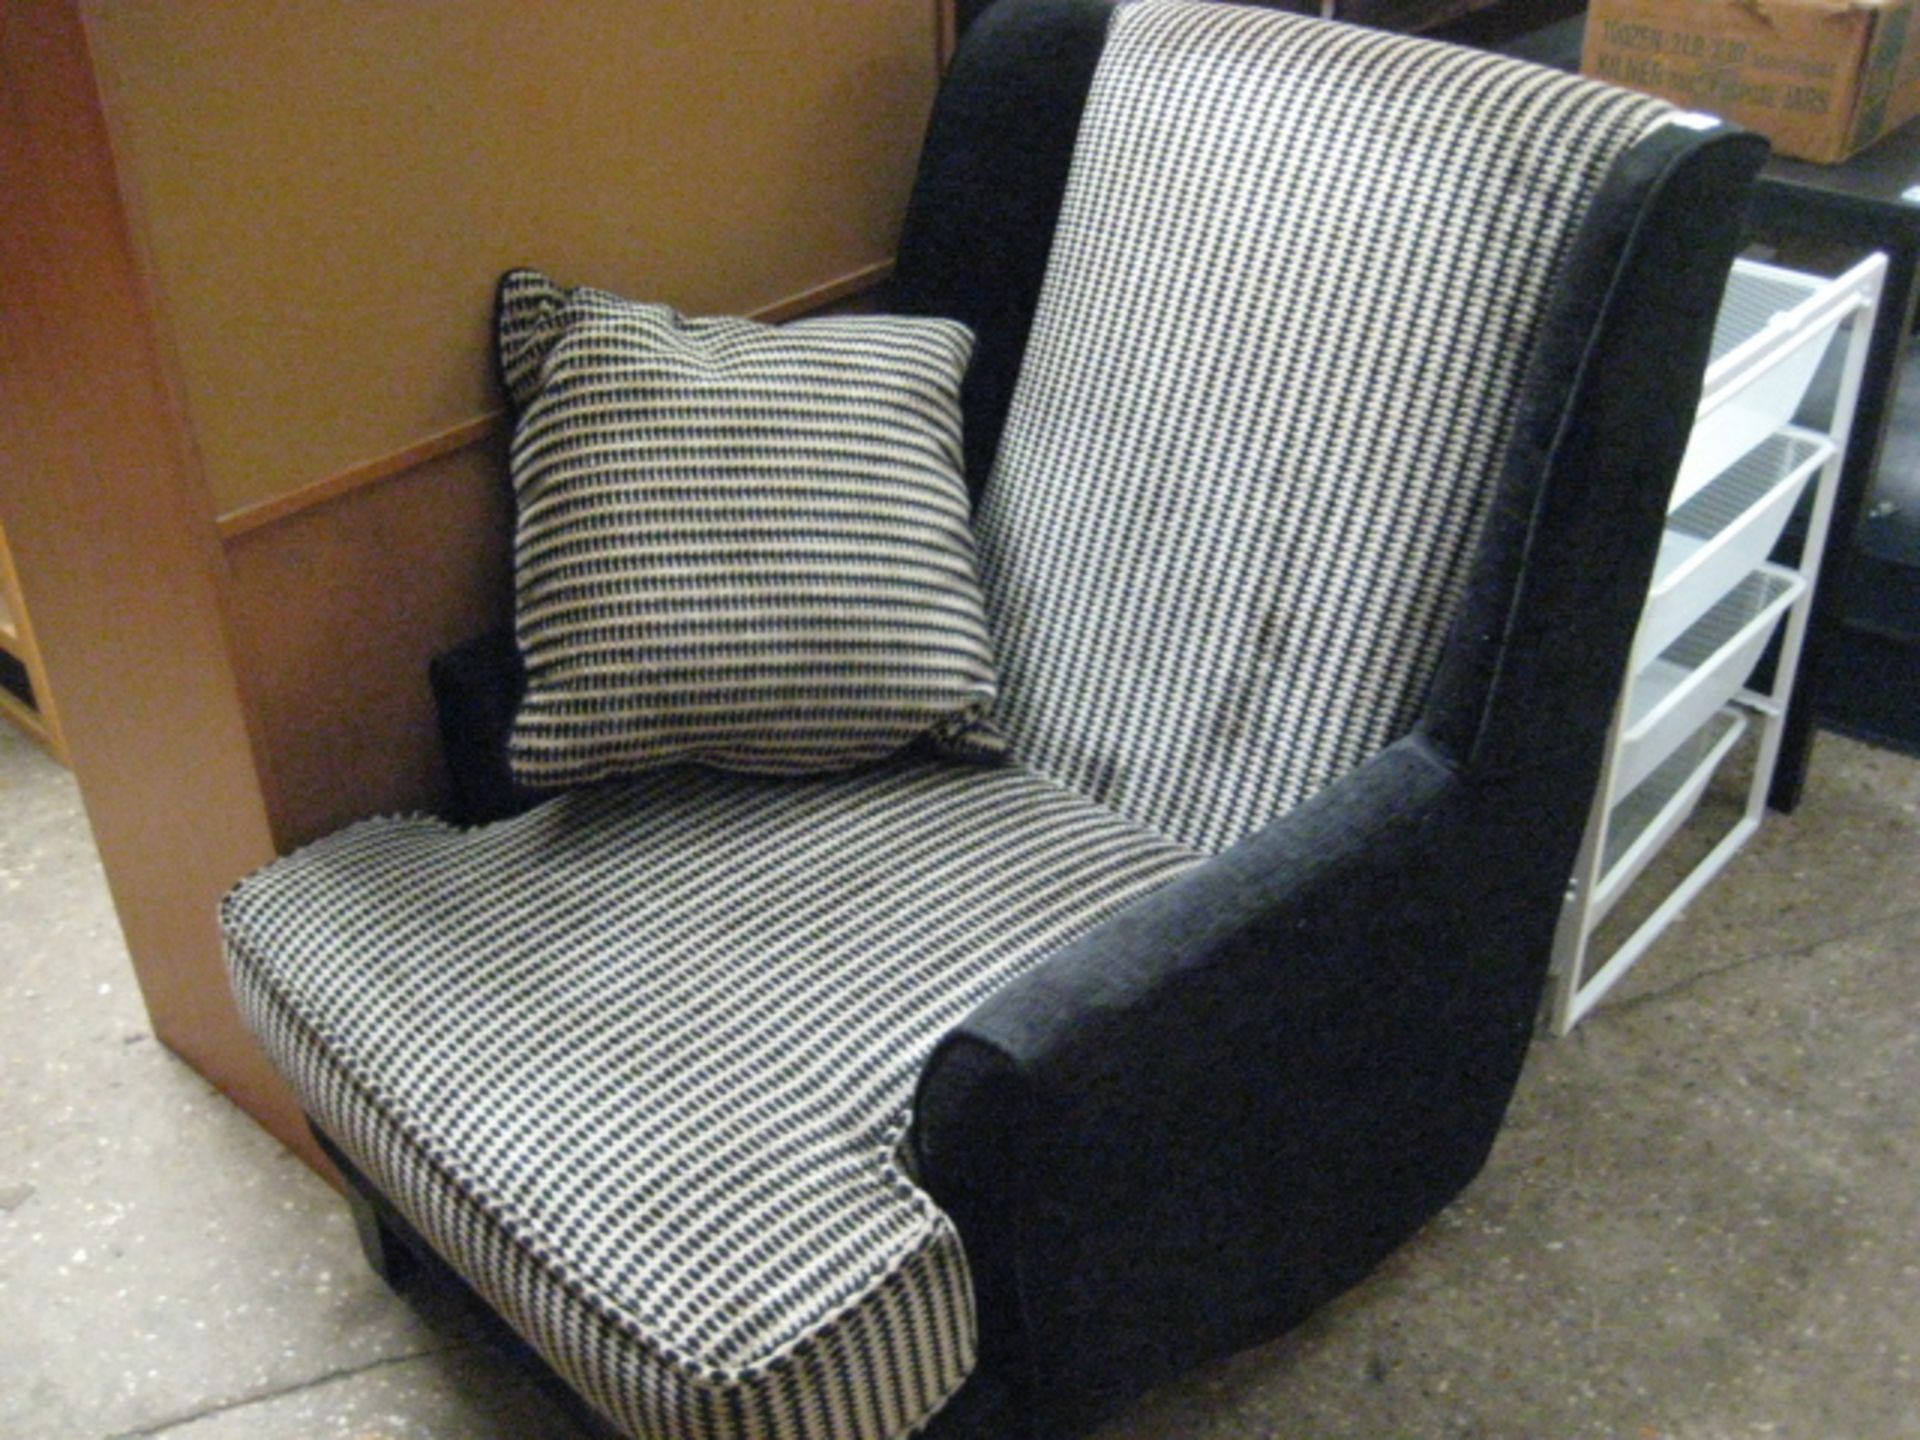 Black and white patterned deep arm chair